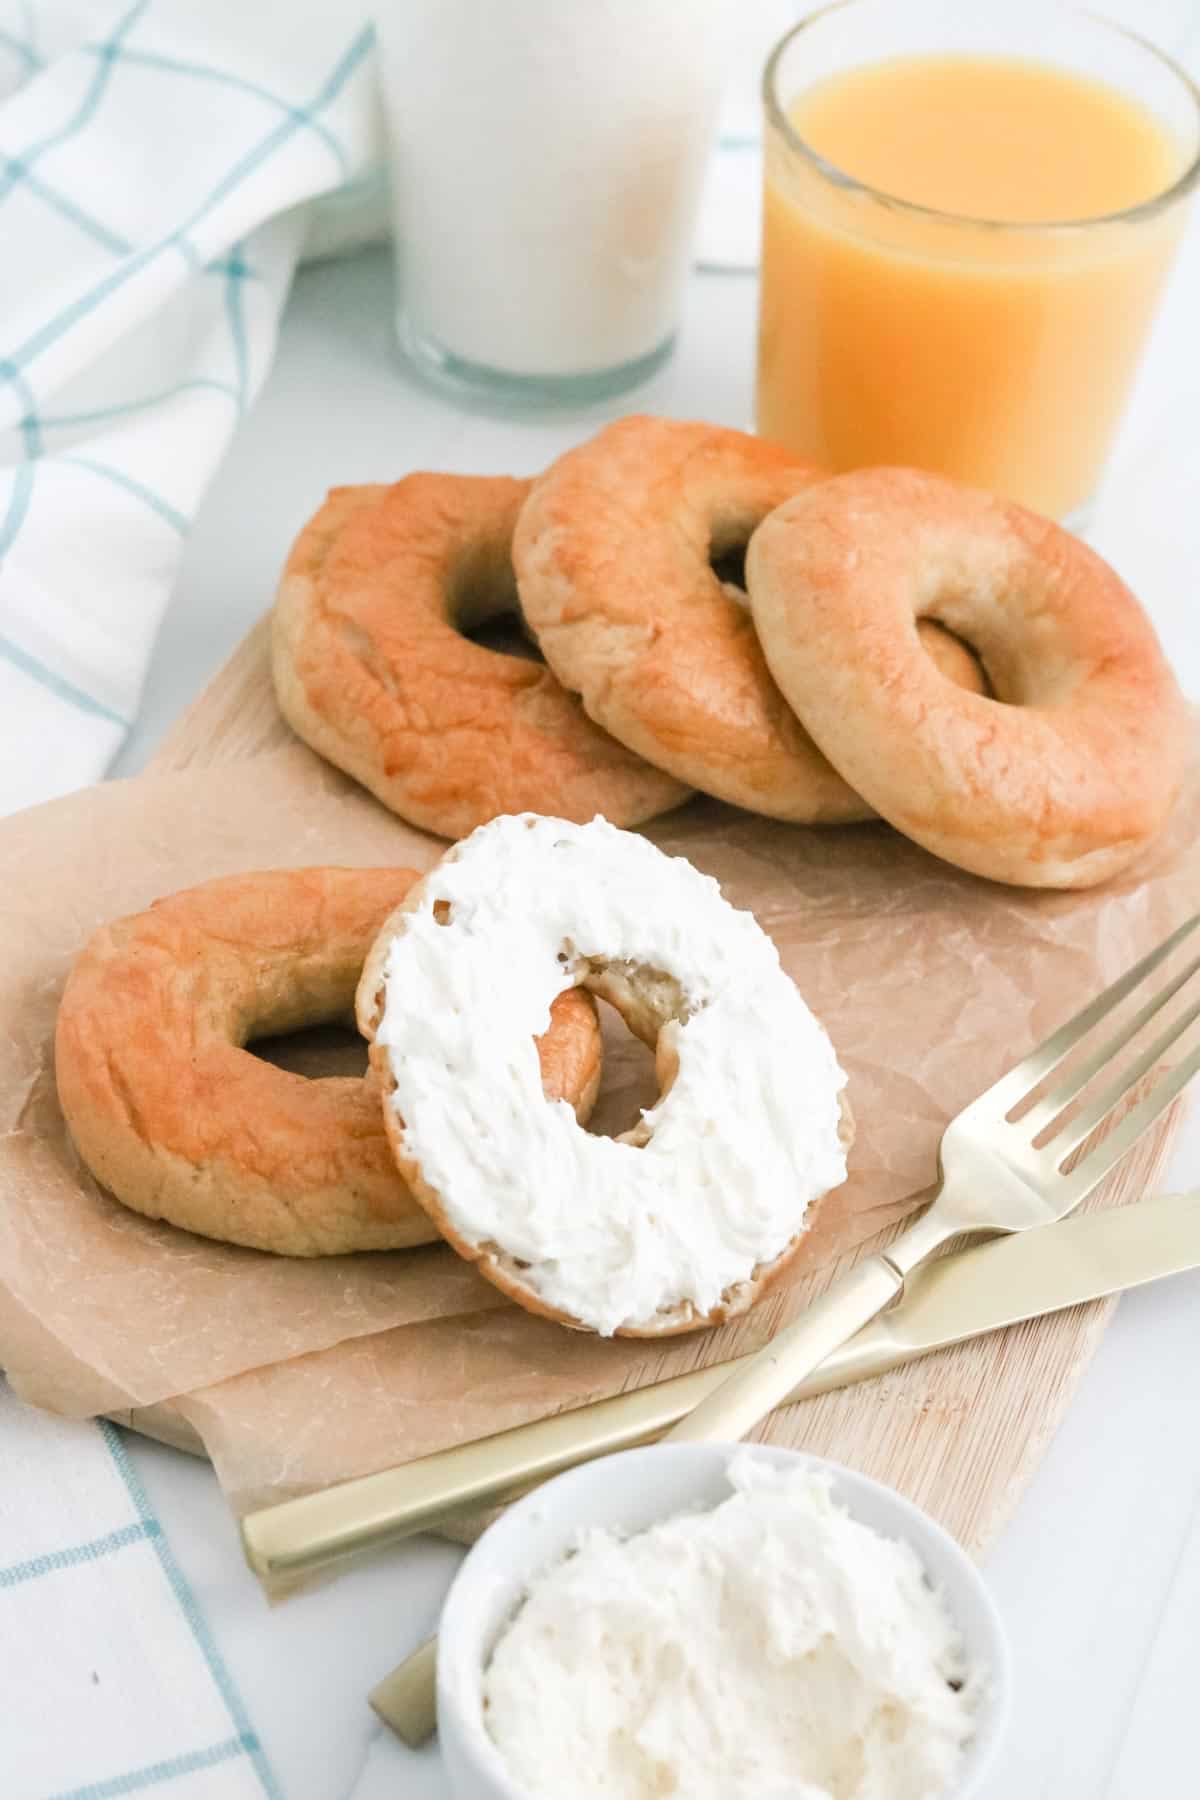 Gluten free bagels with one cut in half and smeared with cream cheese, on a wooden serving tray